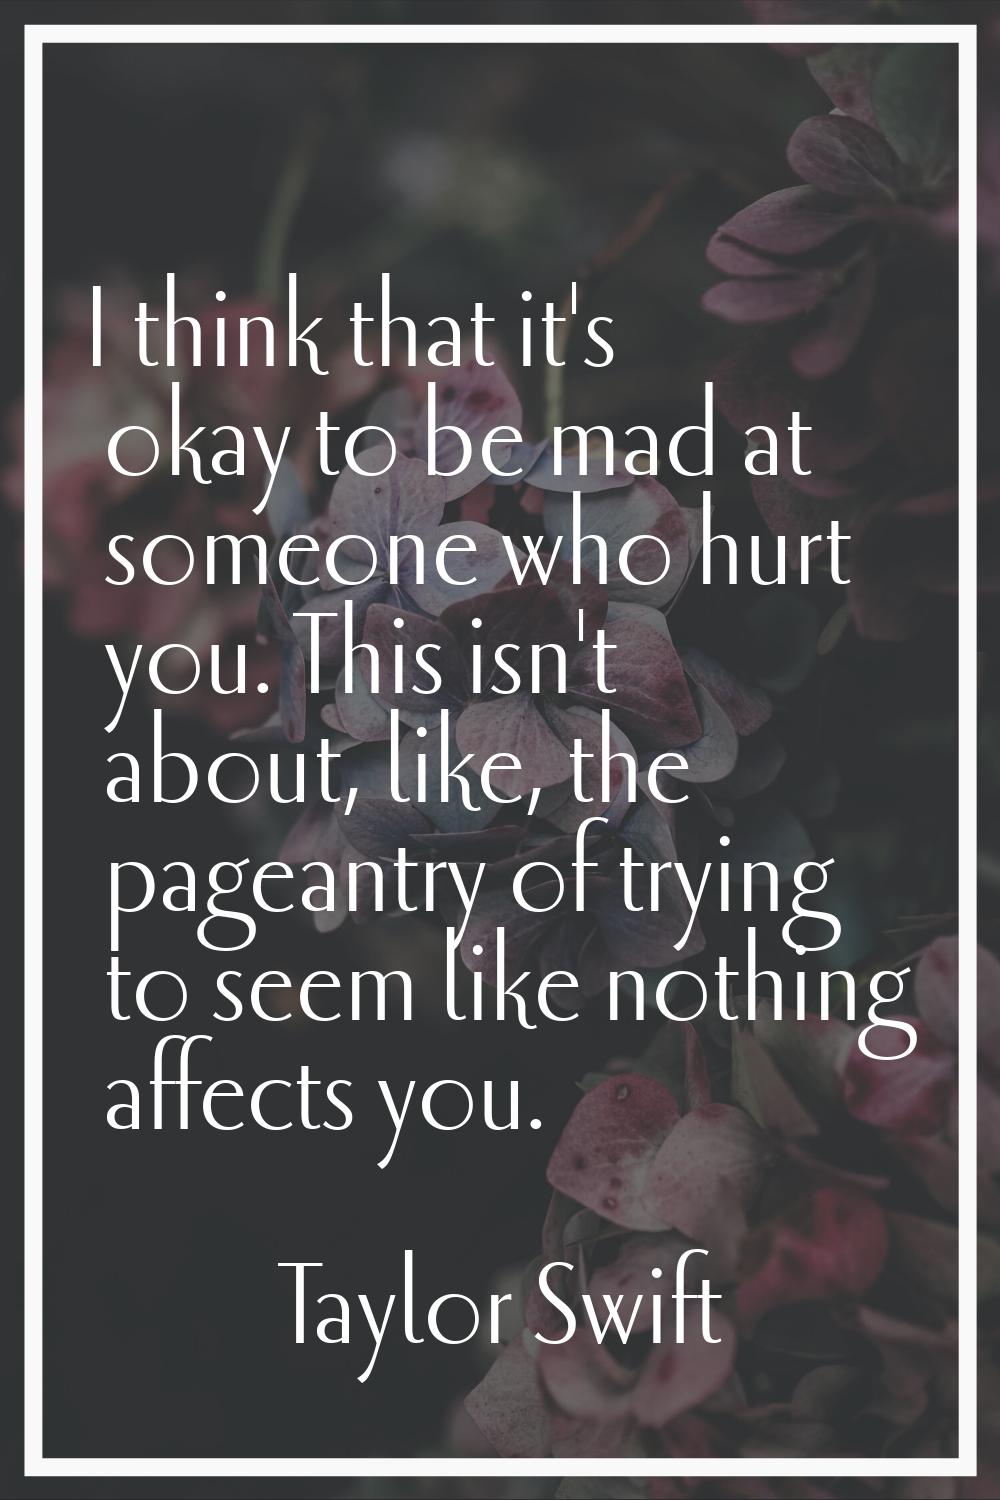 I think that it's okay to be mad at someone who hurt you. This isn't about, like, the pageantry of 